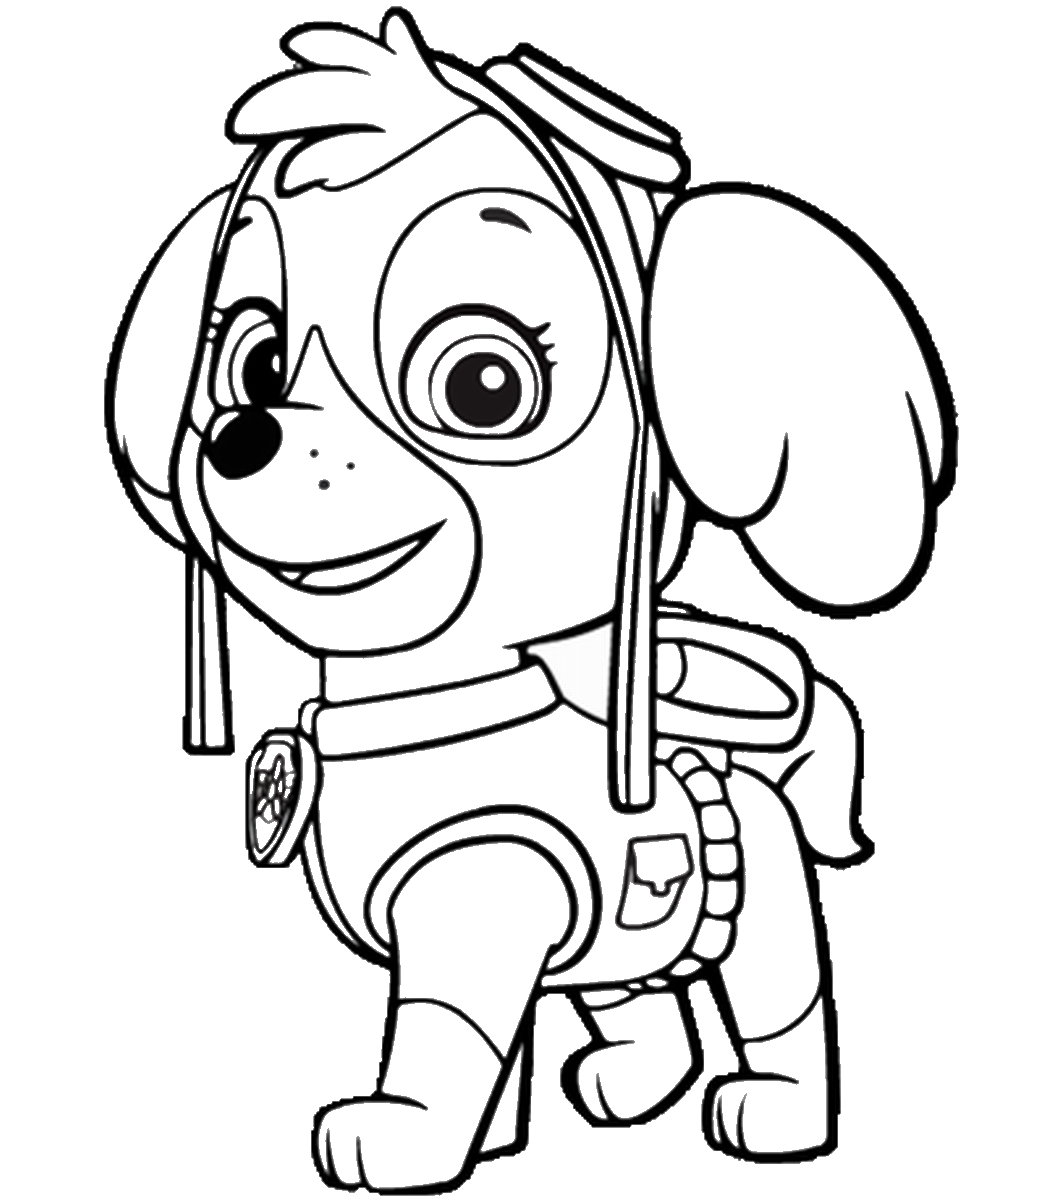 Drawing Paw Patrol #44352 (Cartoons) – Printable coloring pages